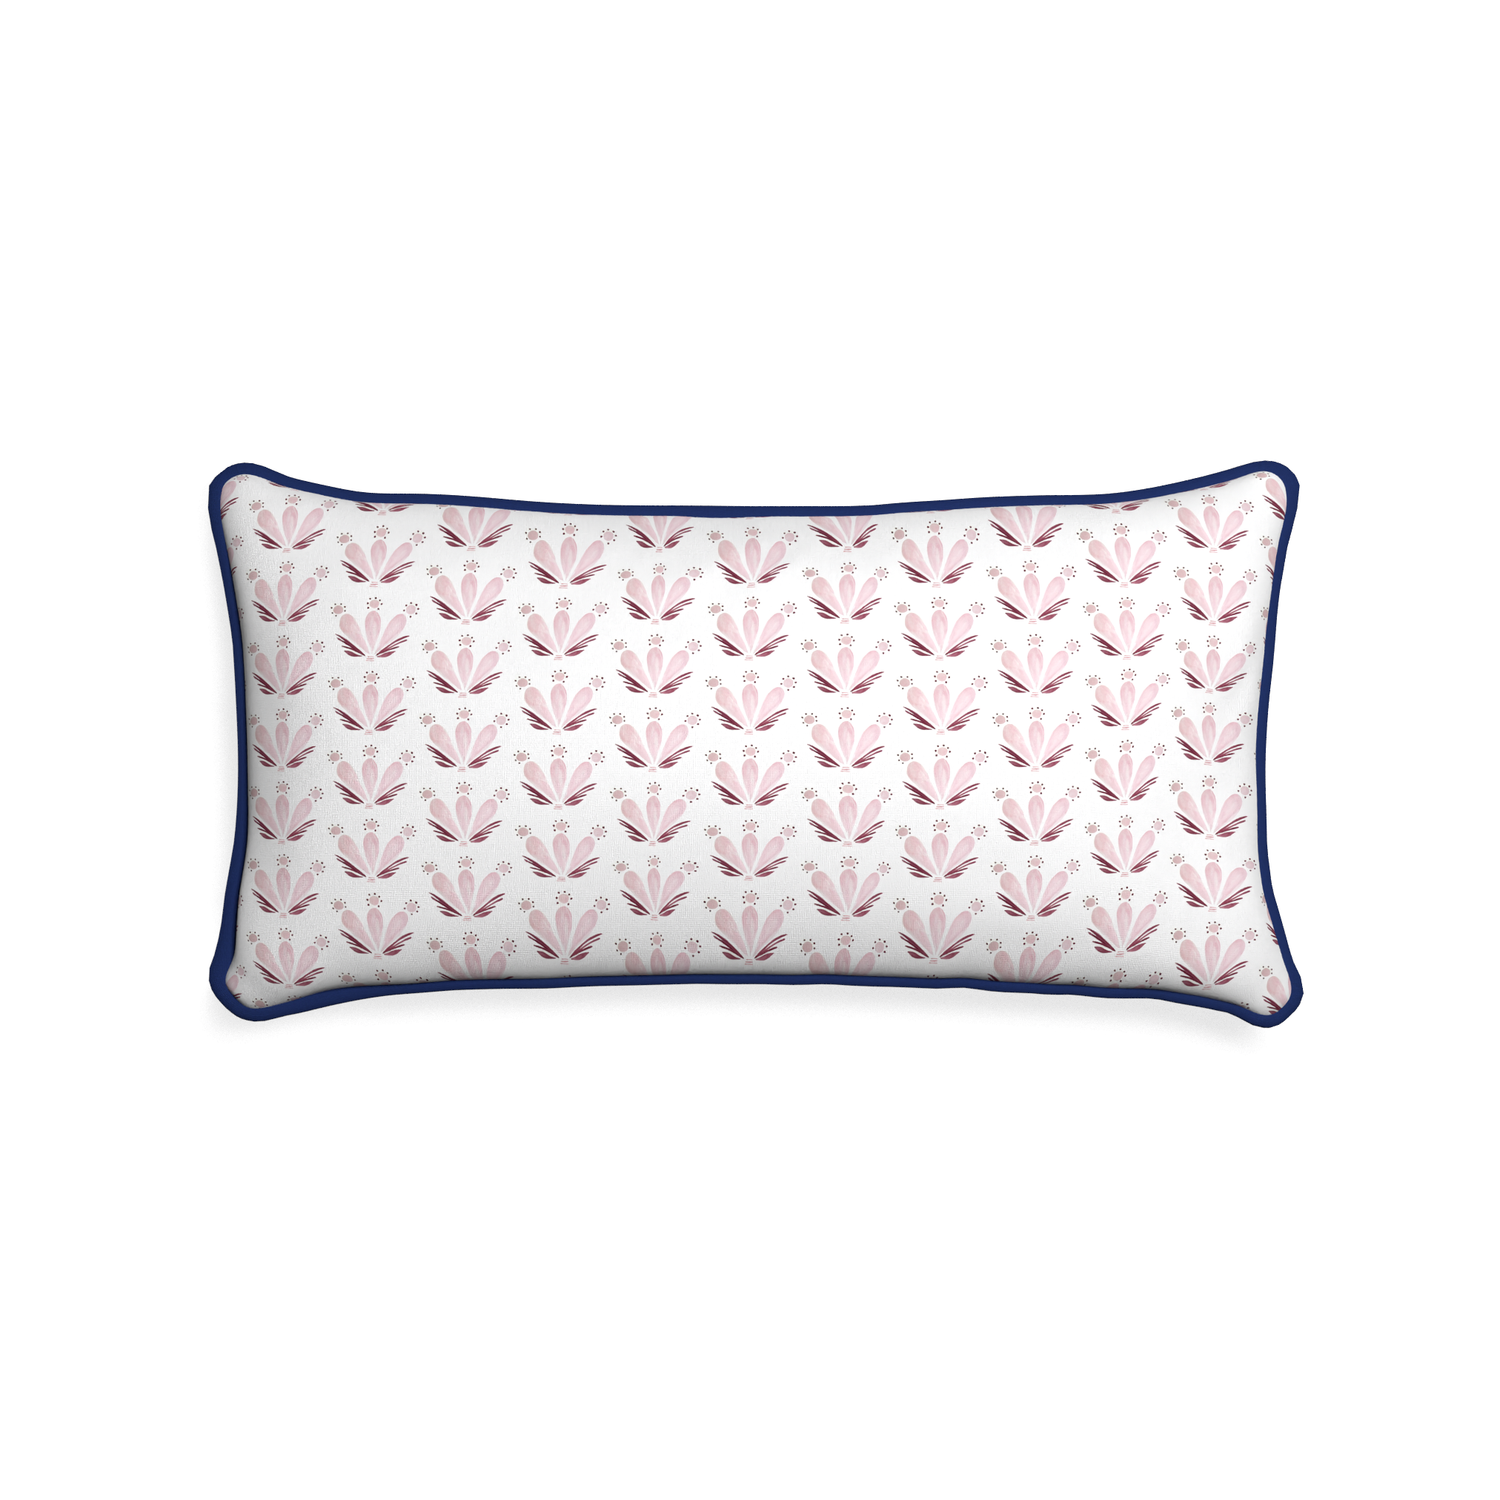 Midi-lumbar serena pink custom pink & burgundy drop repeat floralpillow with midnight piping on white background